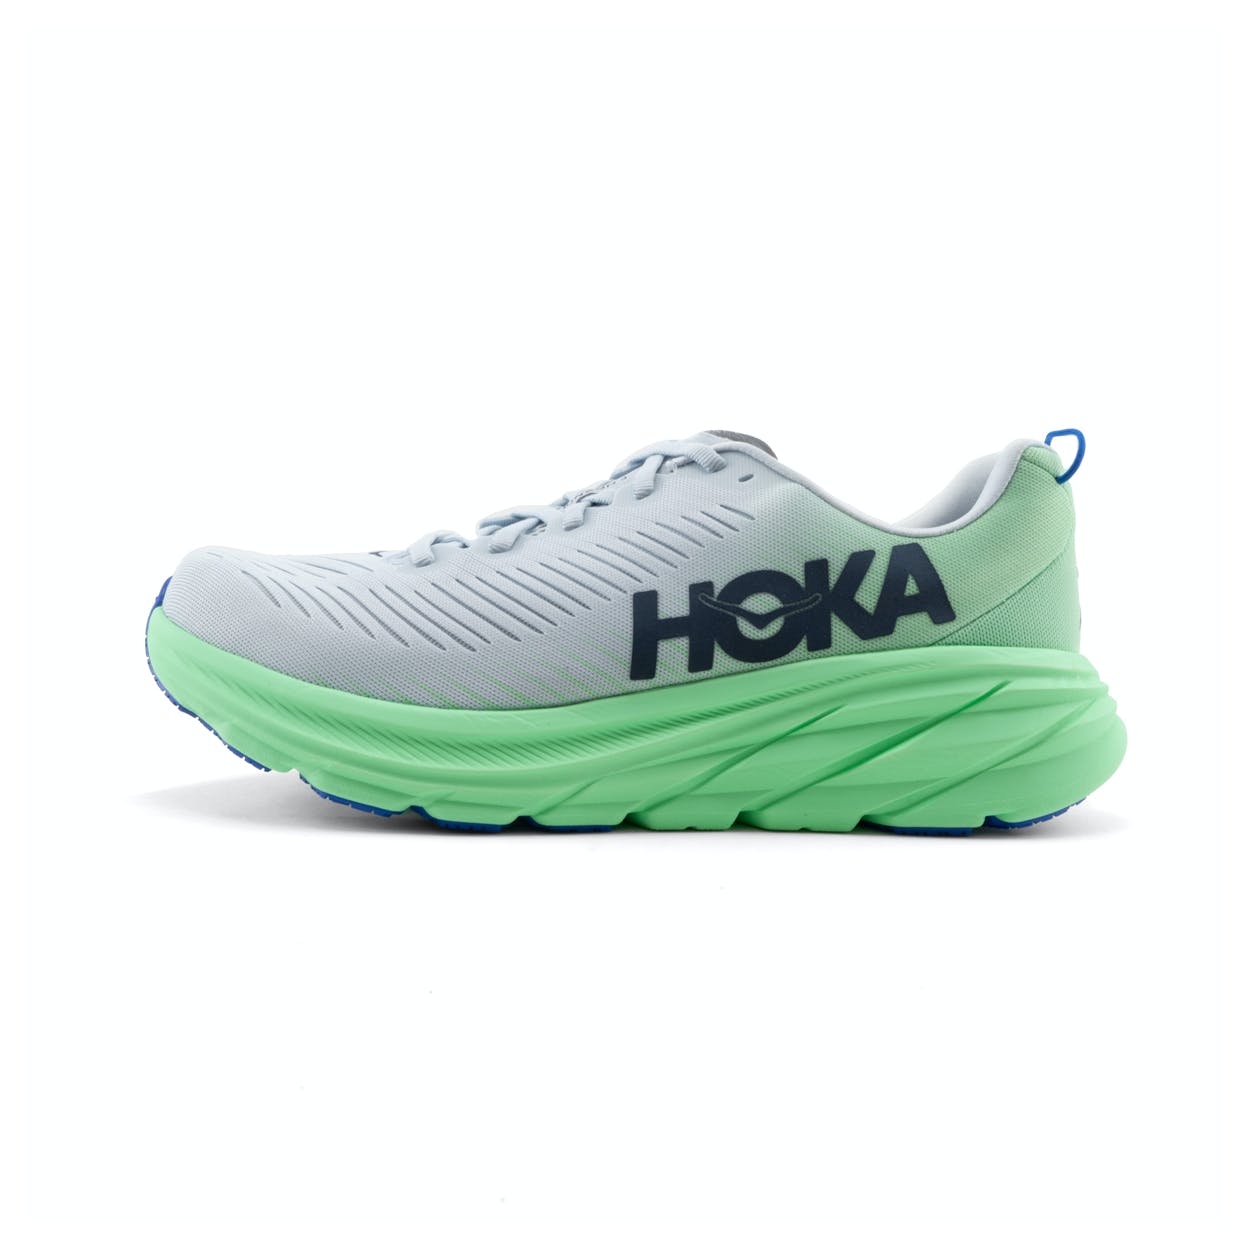 5 Best Hoka Shoes For High Arches: 2x Support, Half The Pain